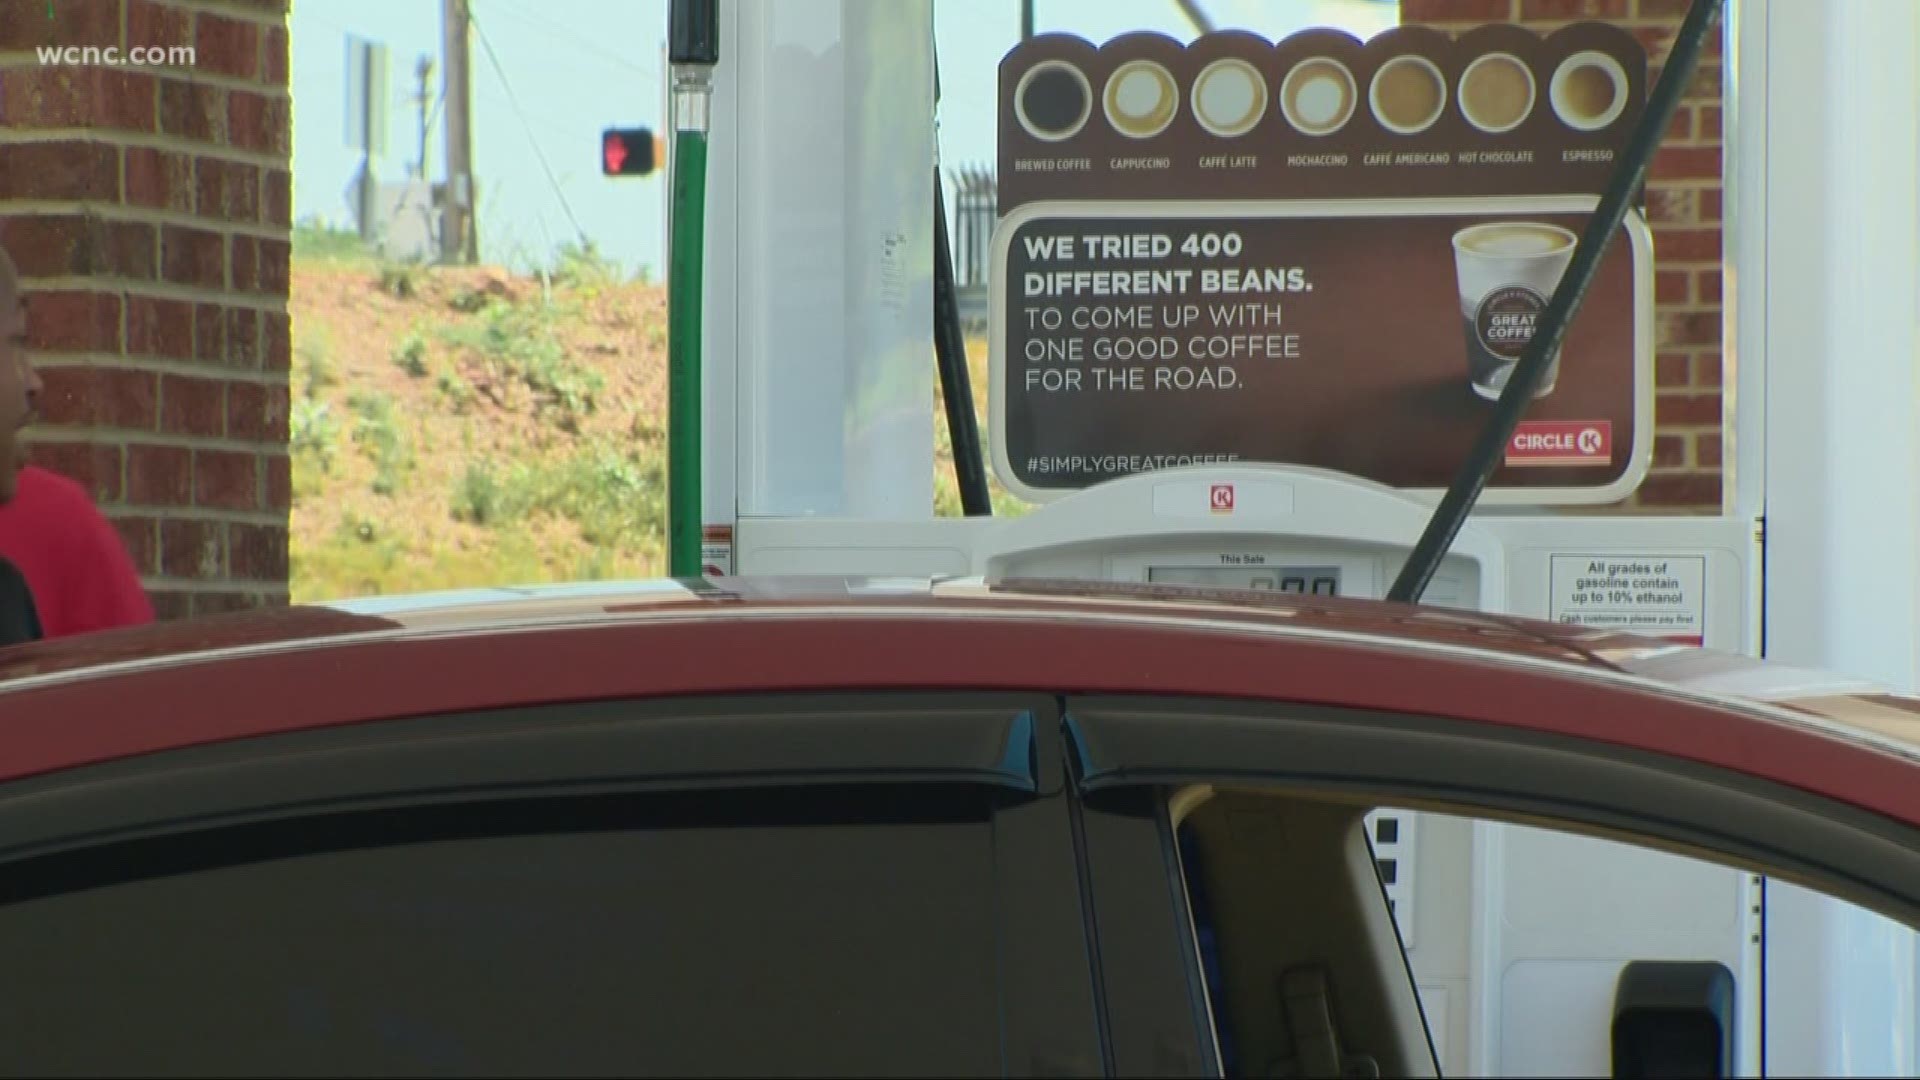 If you need to fill up your car, there's a good reason to top your tank Thursday to help local schools.